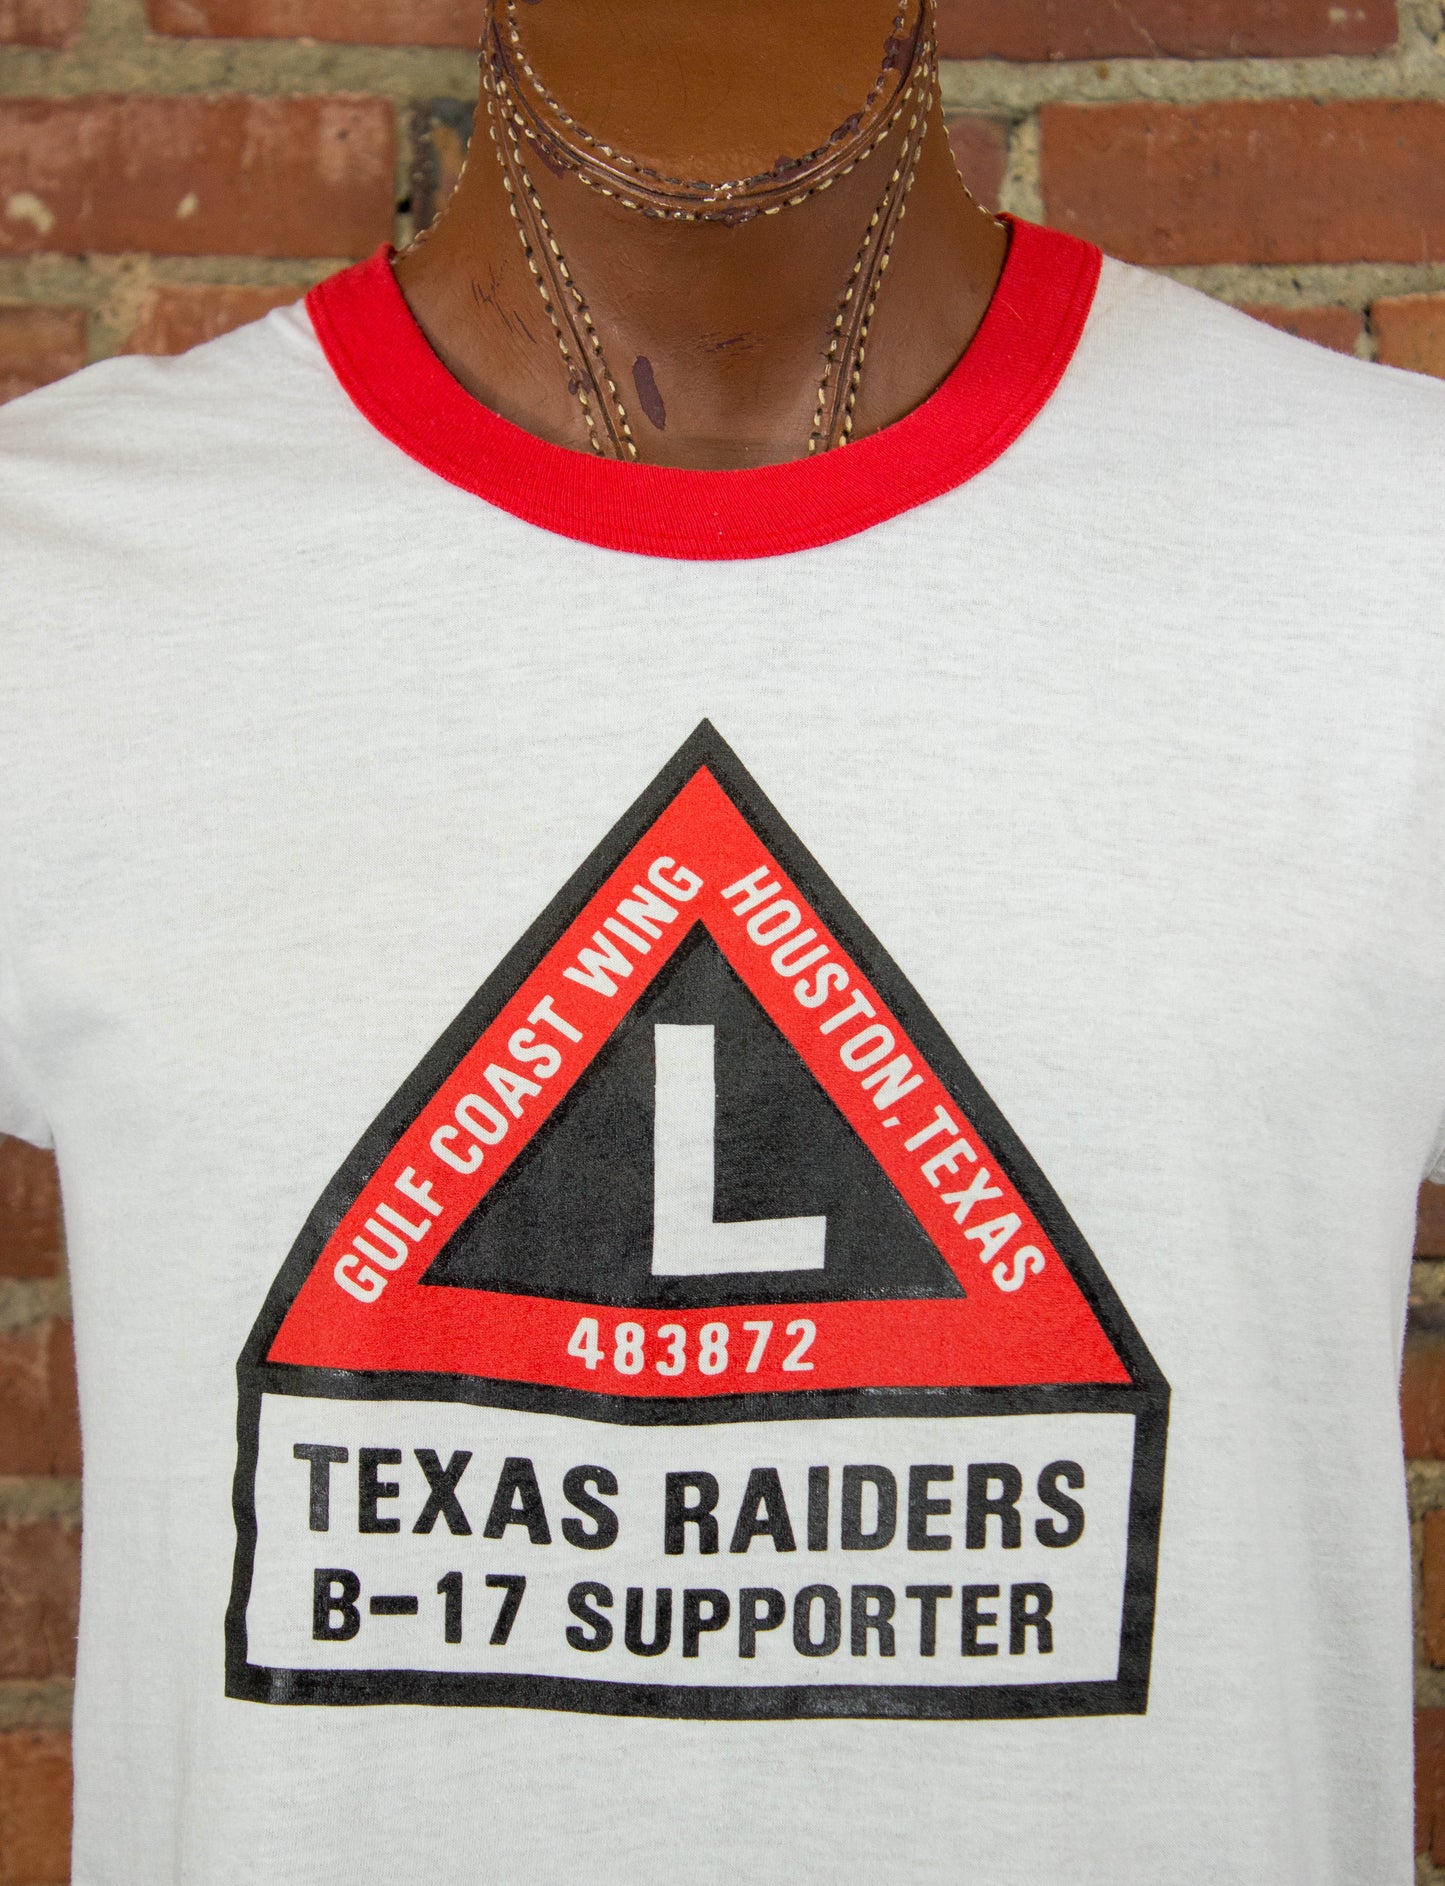 Vintage 80s Texas Raiders B-17 Supporter Gulf Coast Wing White and Red Graphic Ringer T Shirt Unisex Medium-Large